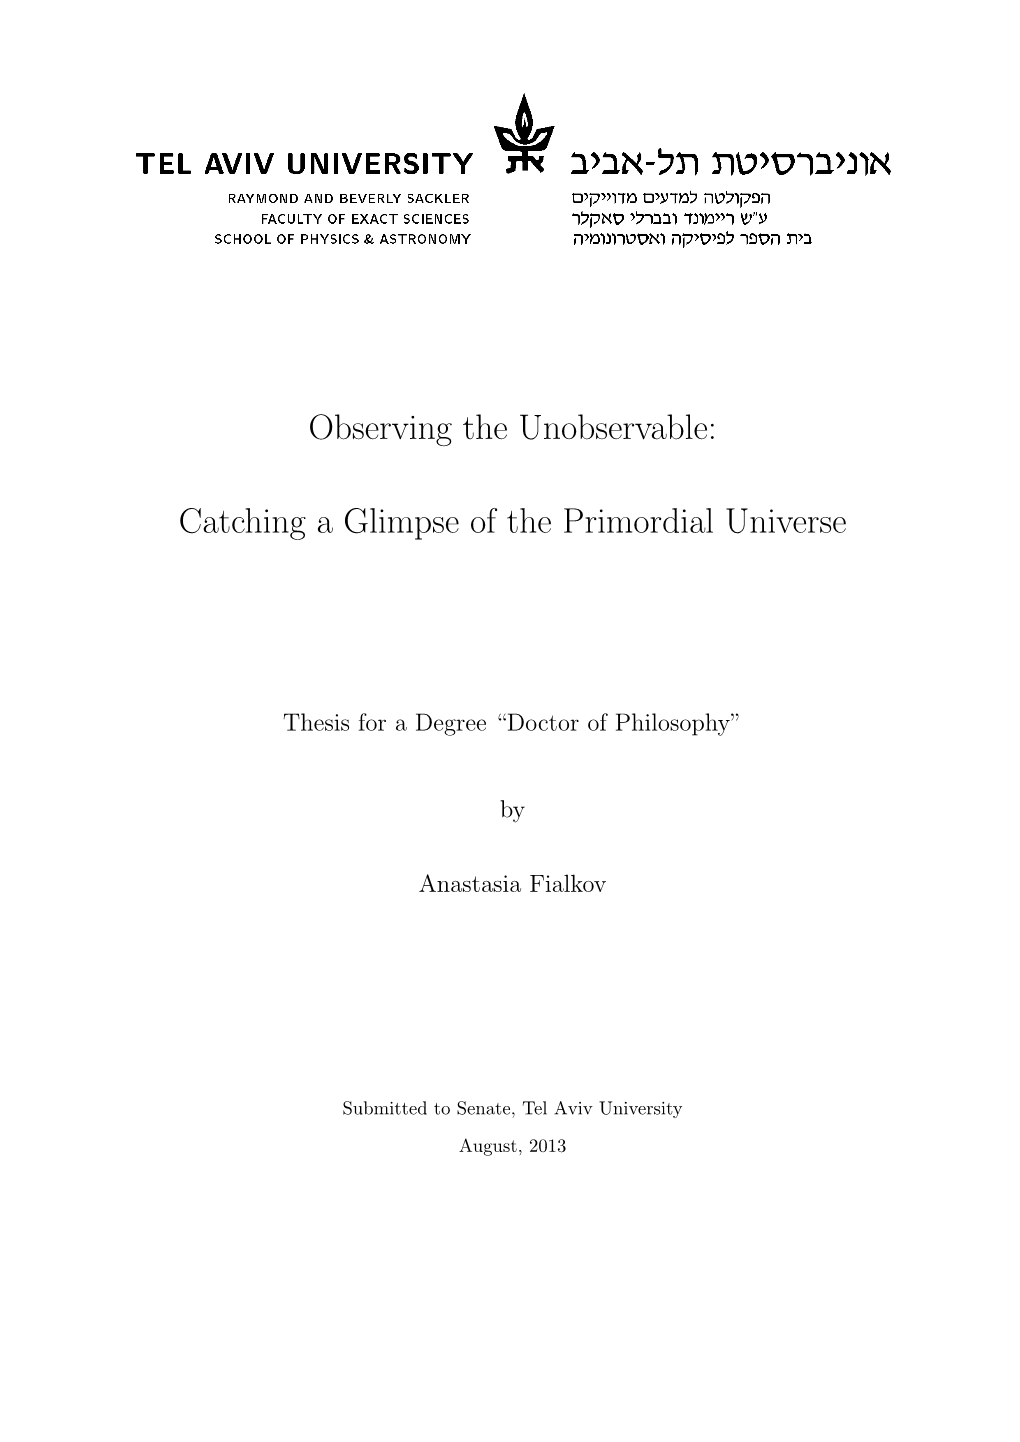 Phd. Thesis: "Observing the Unobservable: Catching a Glimpse of the Primordial Universe"